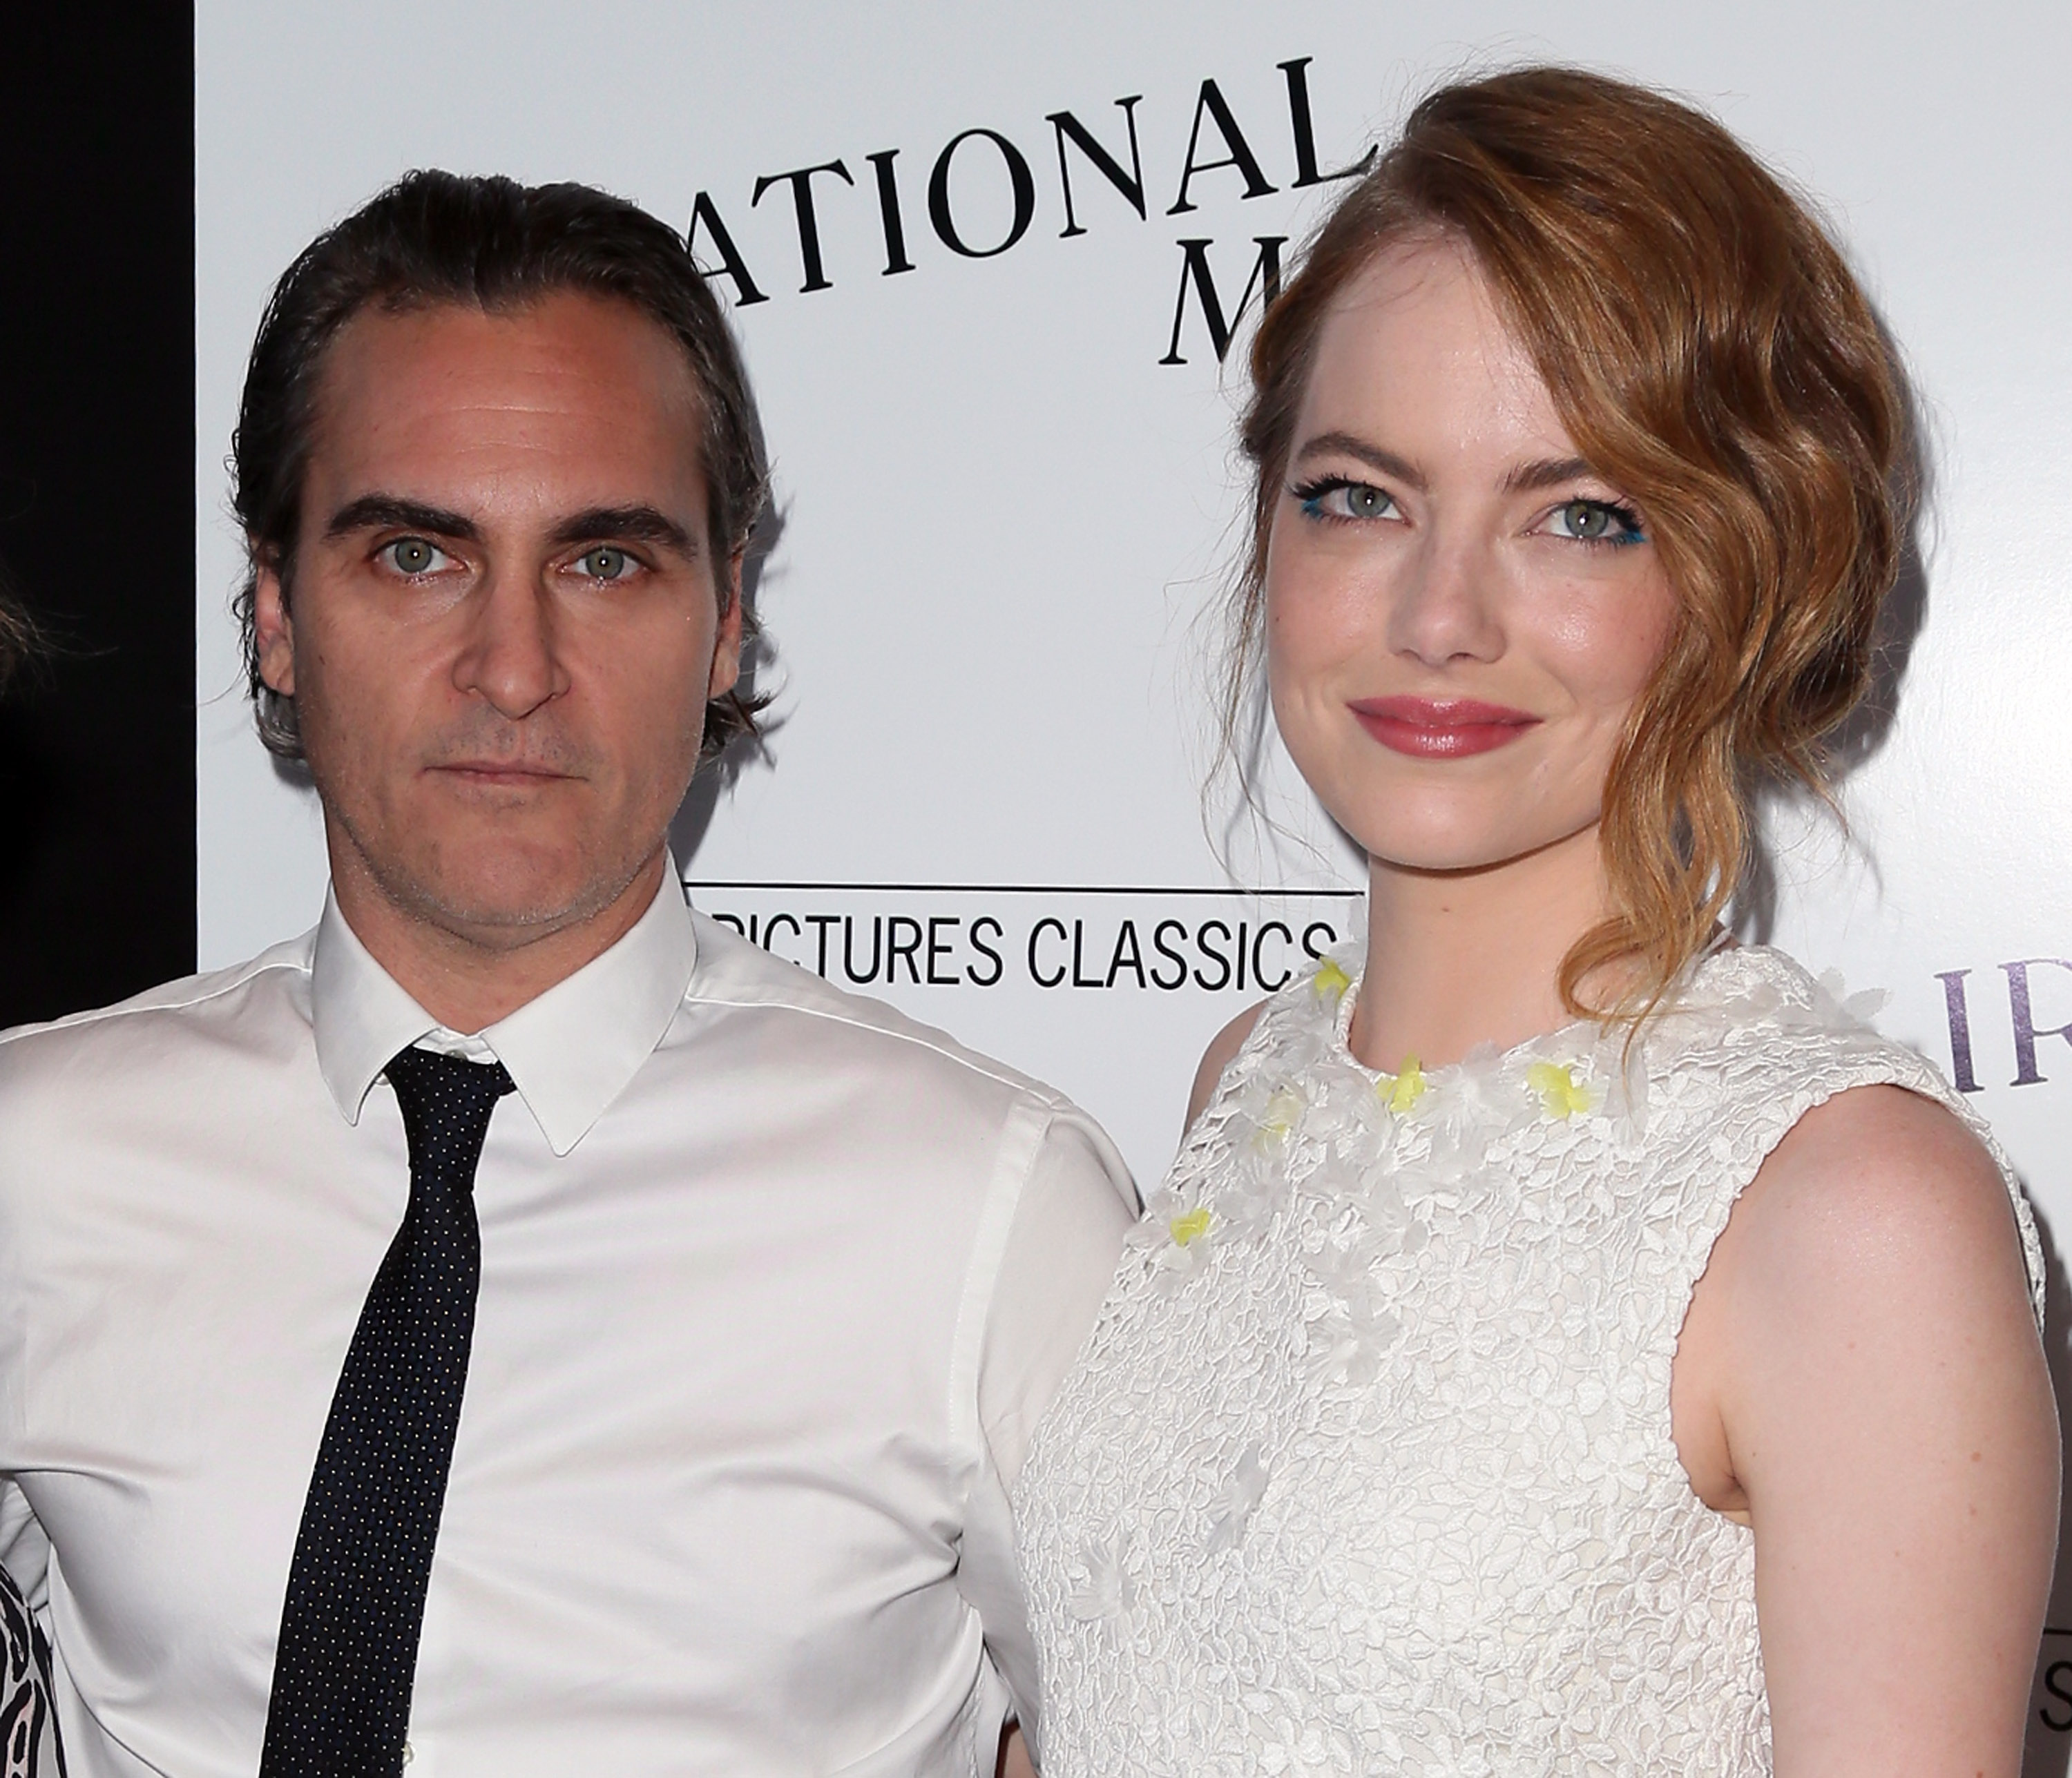 Joaquin Phoenix and Emma Stone attend the premiere of "Irrational Man" in Los Angeles on July 9, 2015.